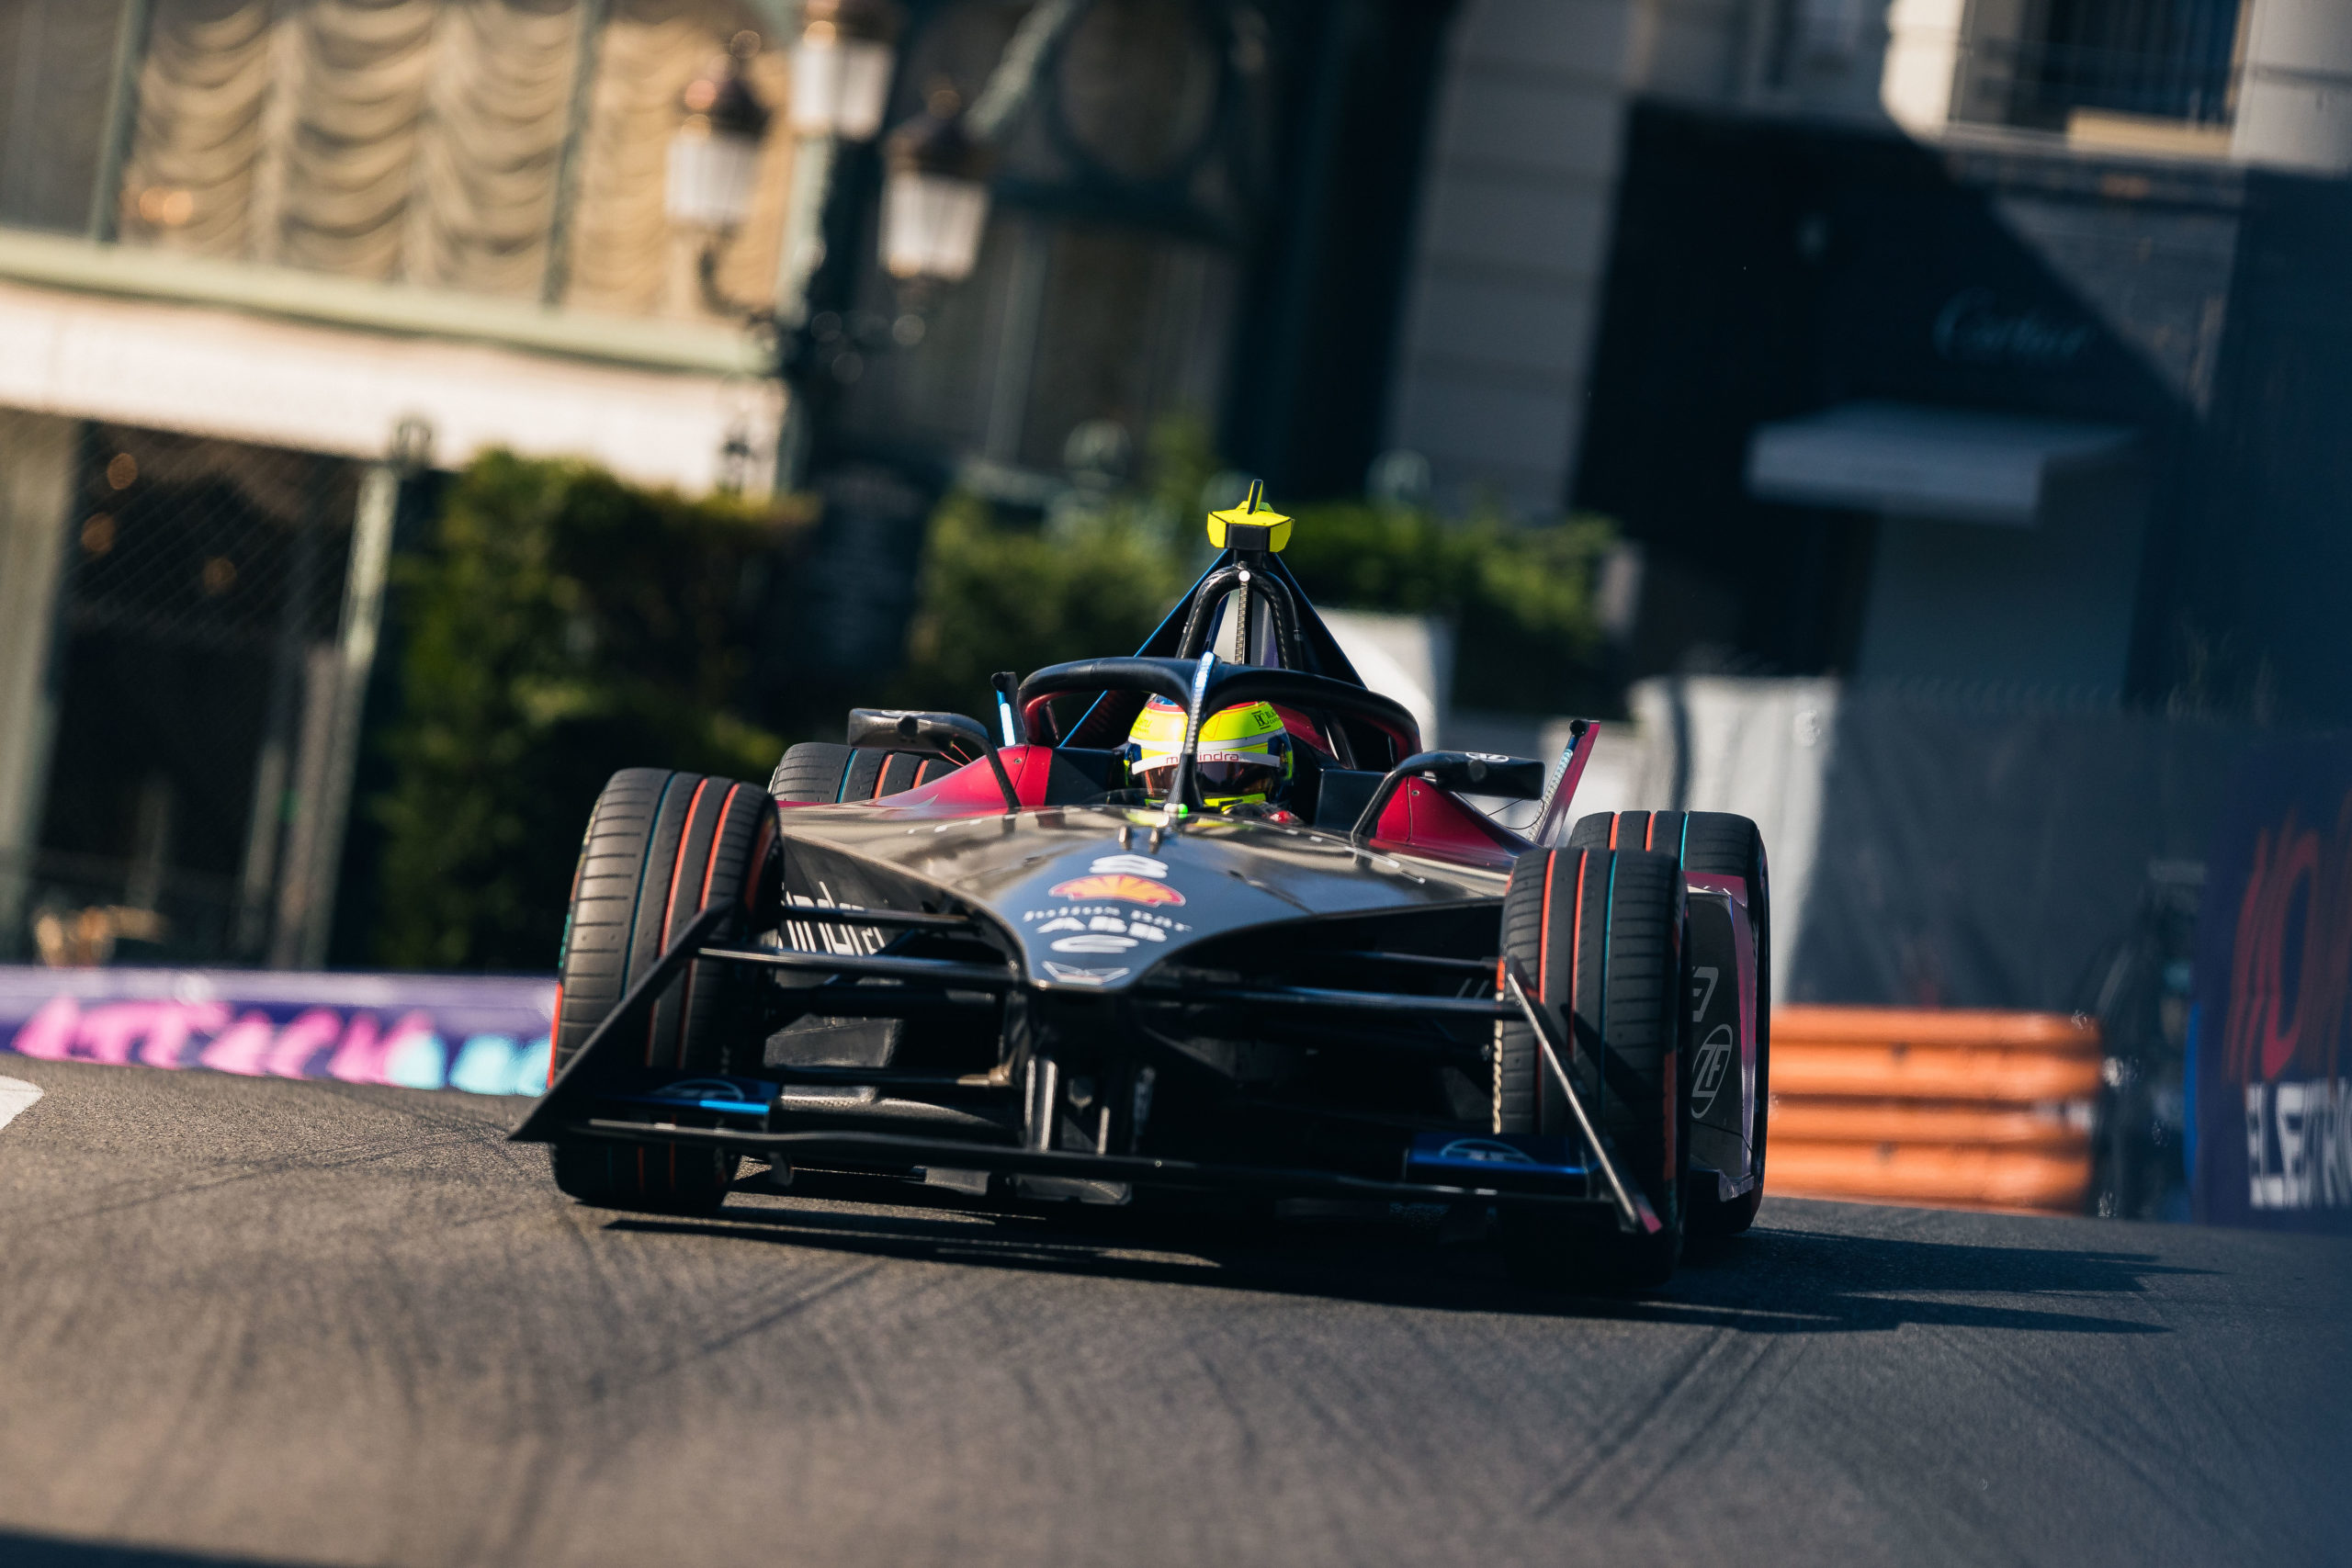 rowland’s ruthlessness might have saved his formula e career